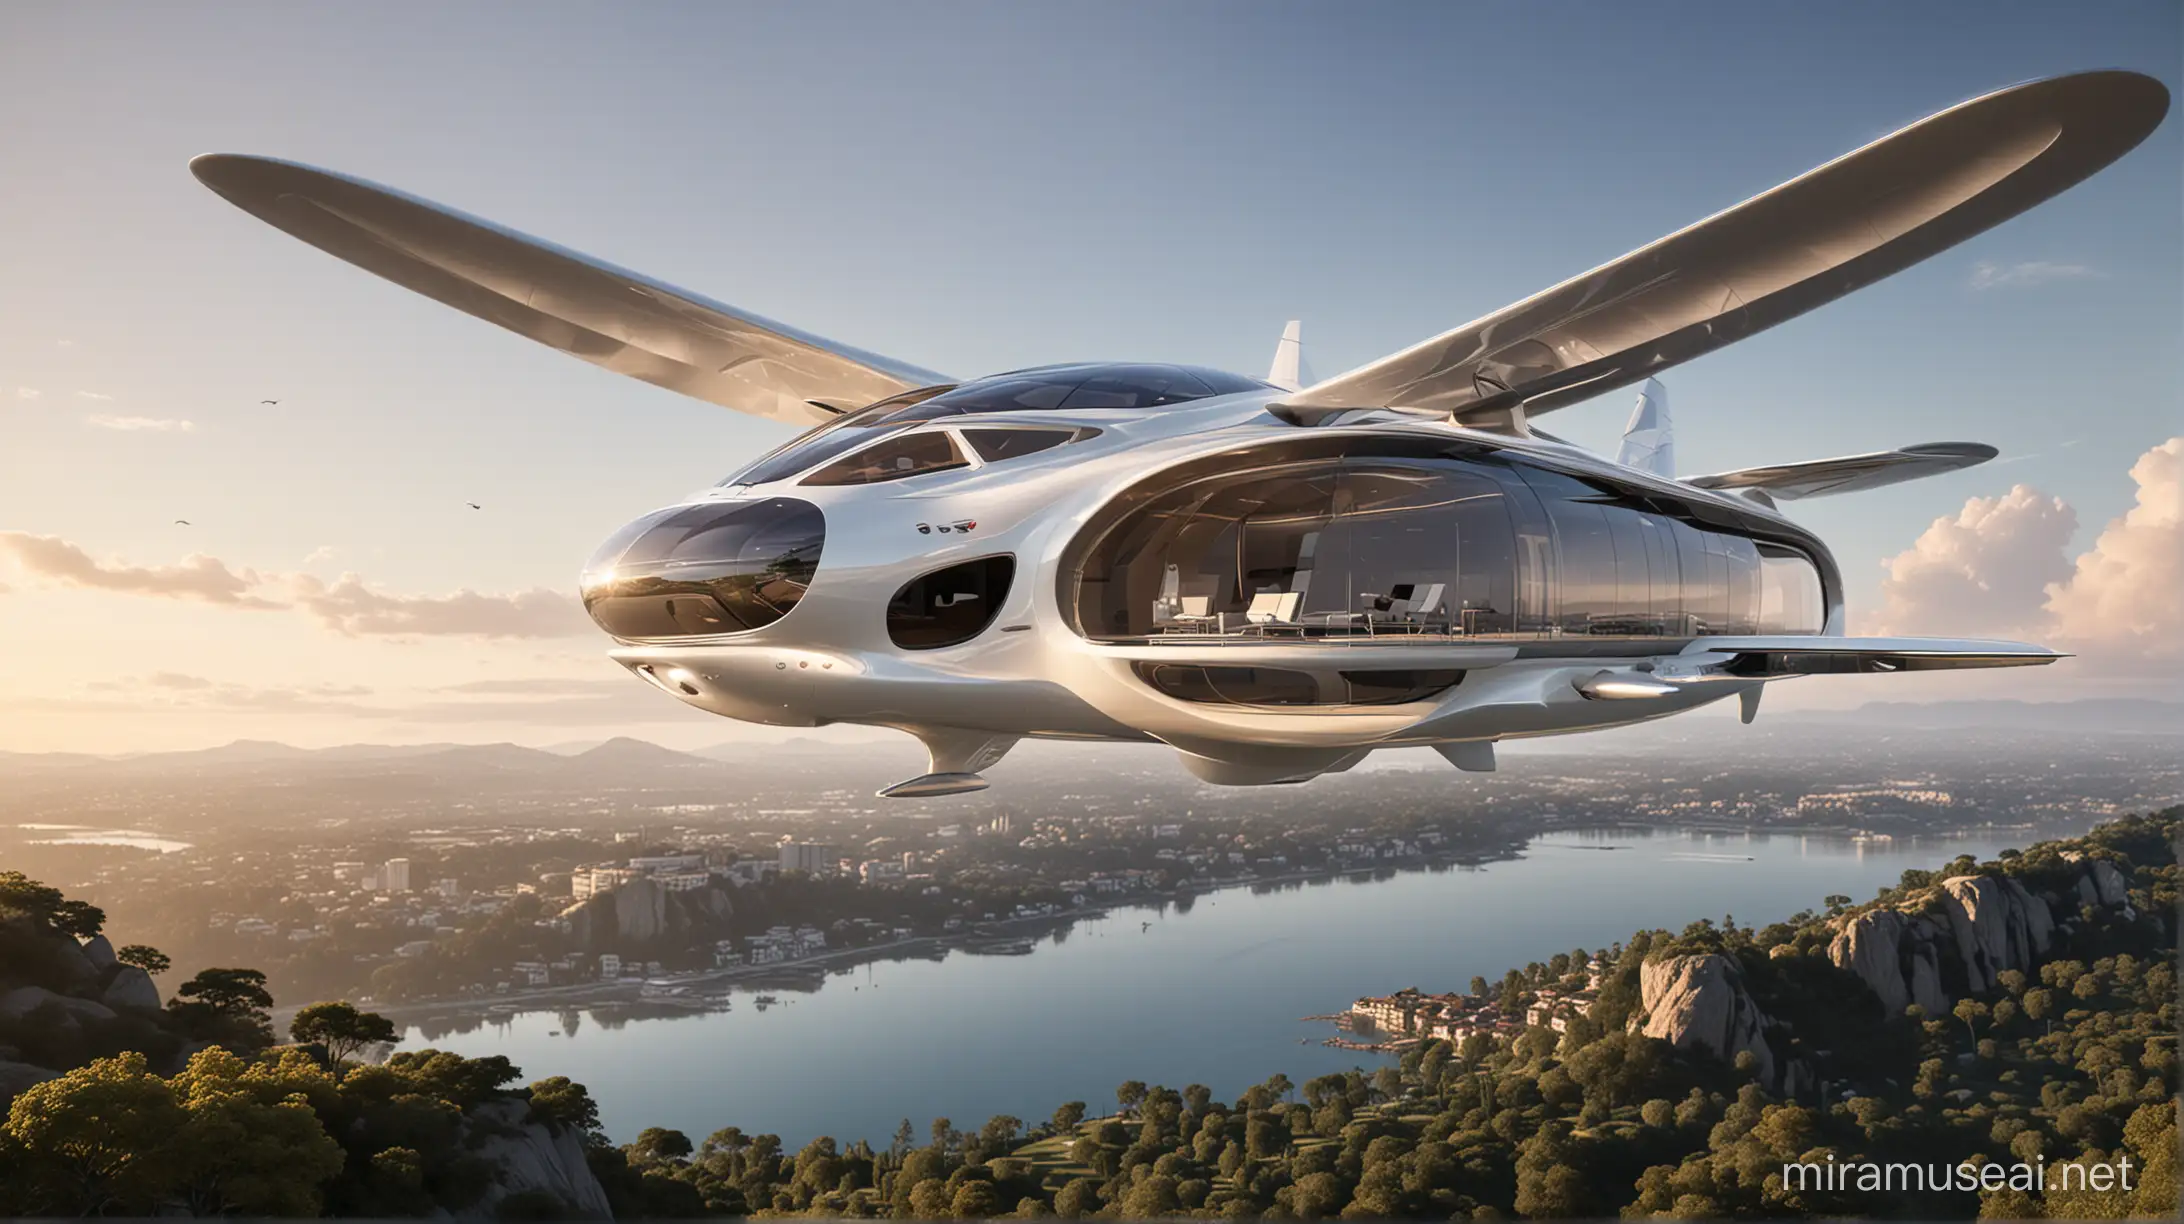 Miramuse AIDesigned ThreeStory Flying Home with Advanced Aerodynamic Features